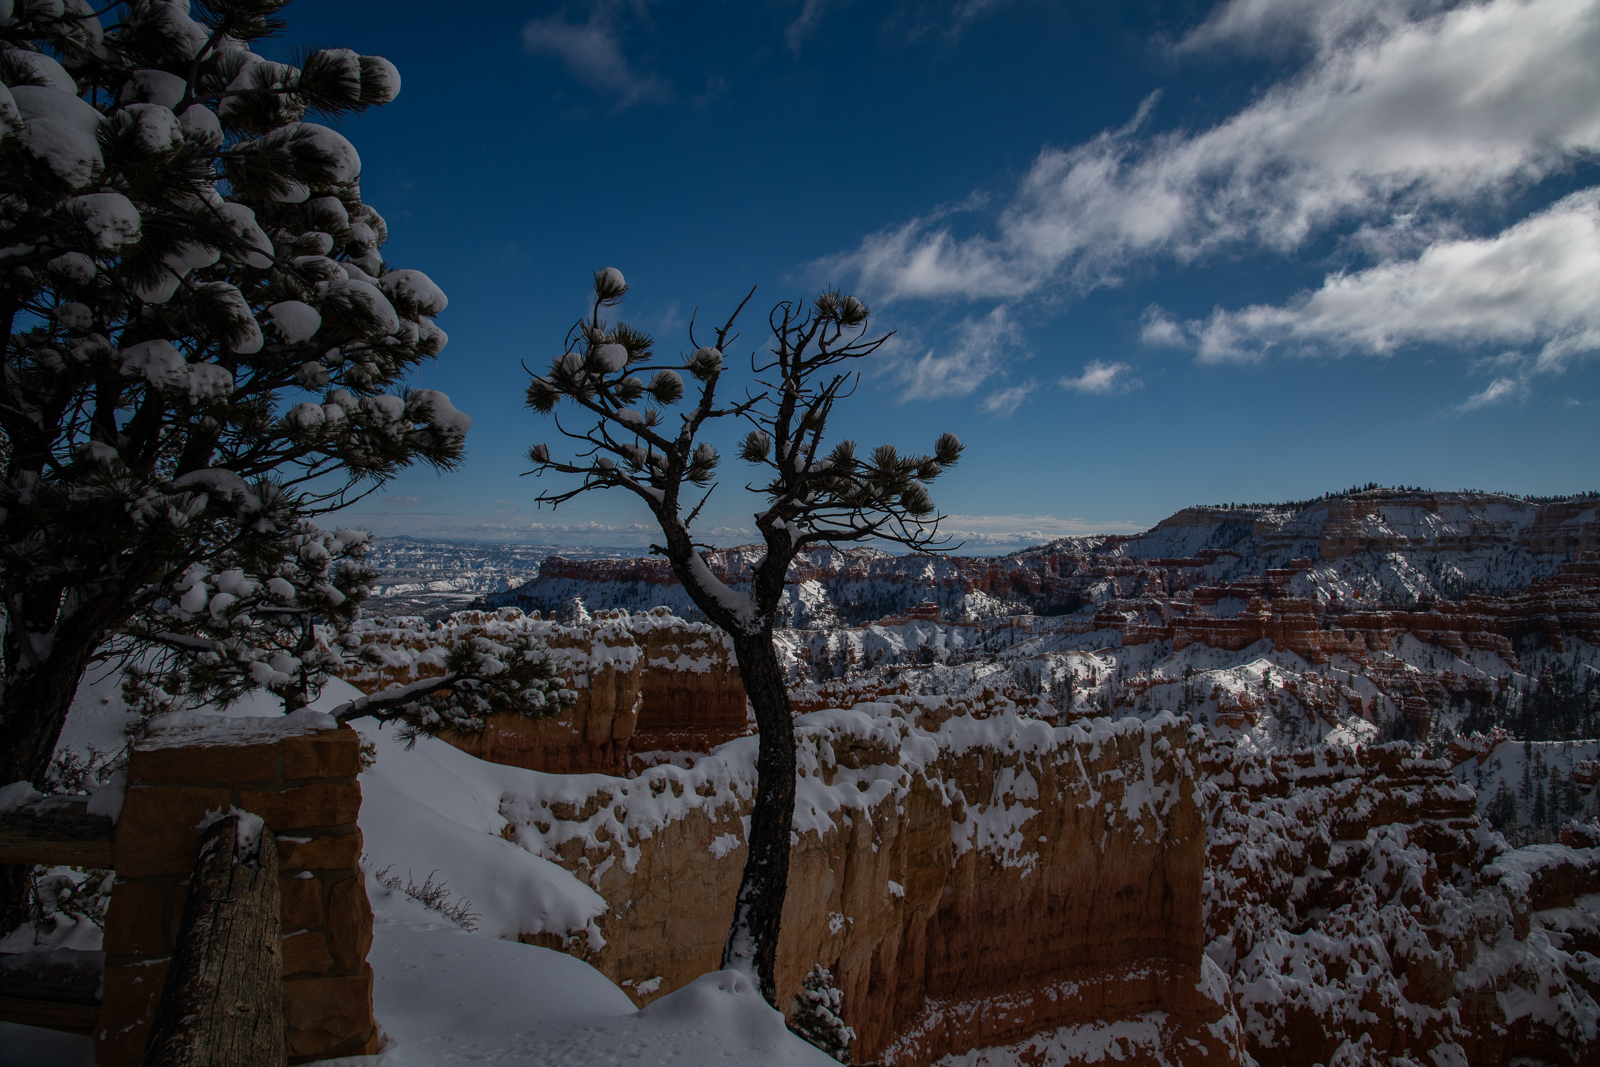 A Dream Come True at Bryce Canyon National Park – A Photo Essay